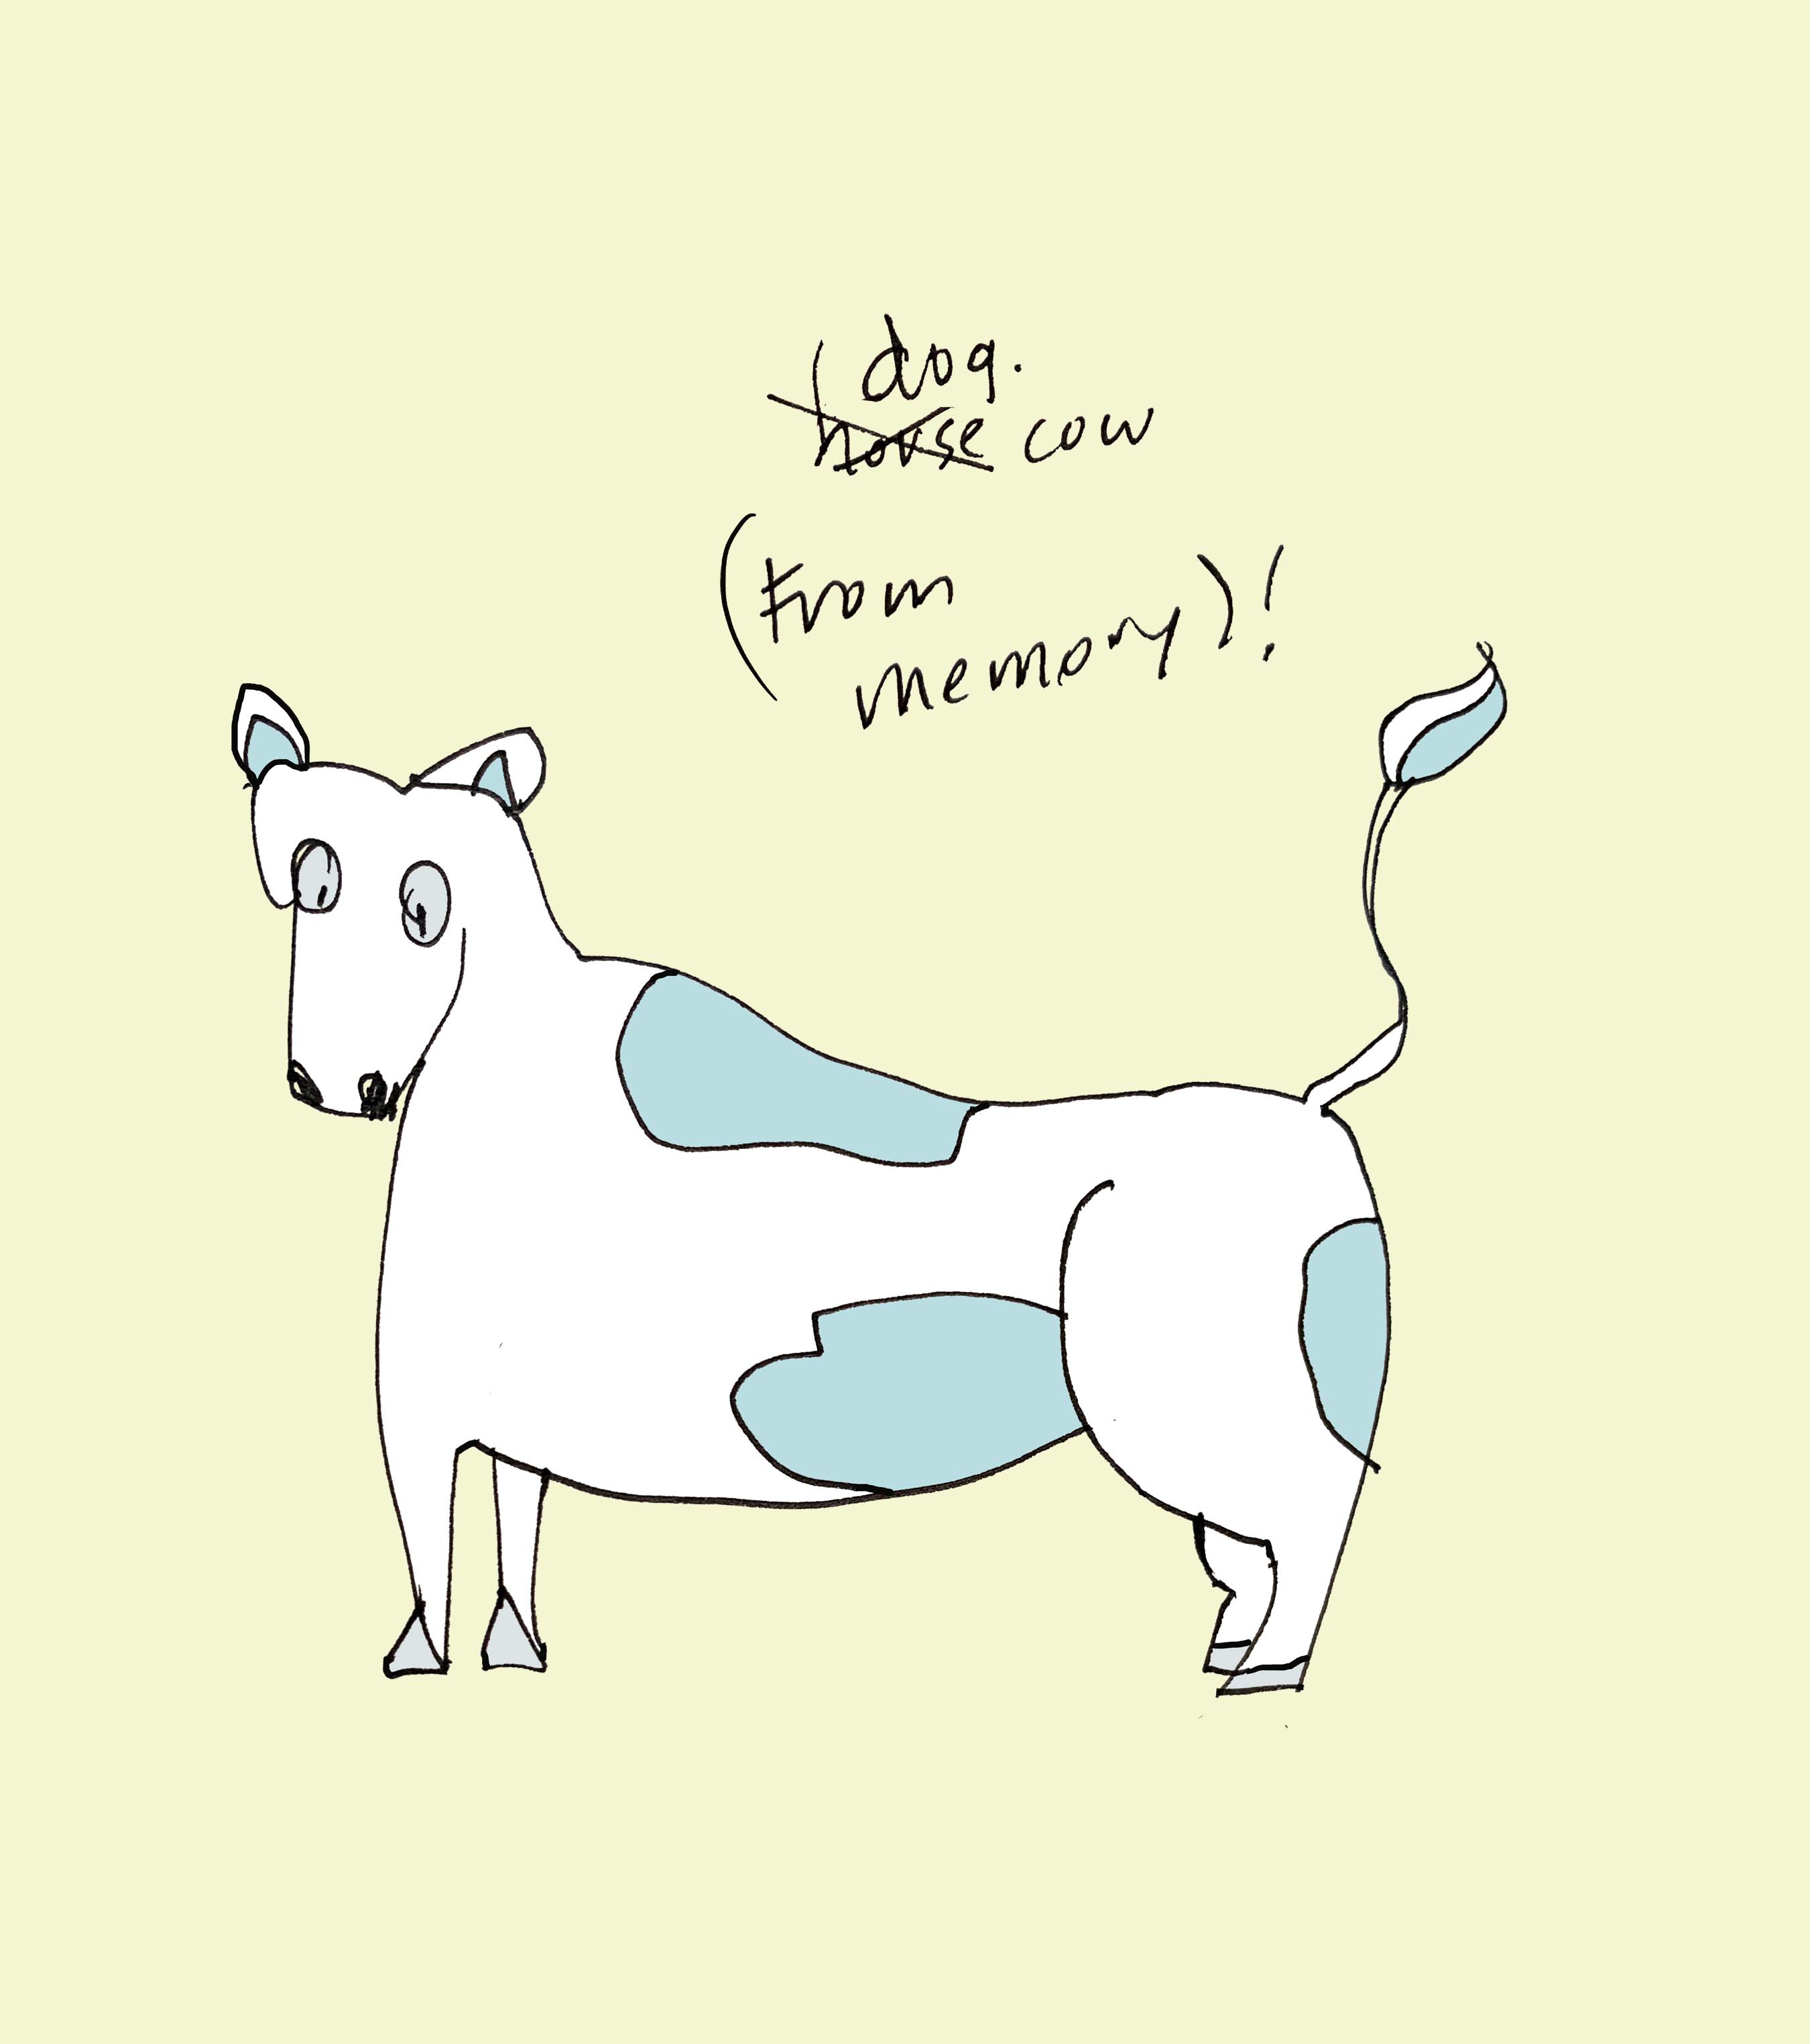 art every day number 563 illustration horse dog cow